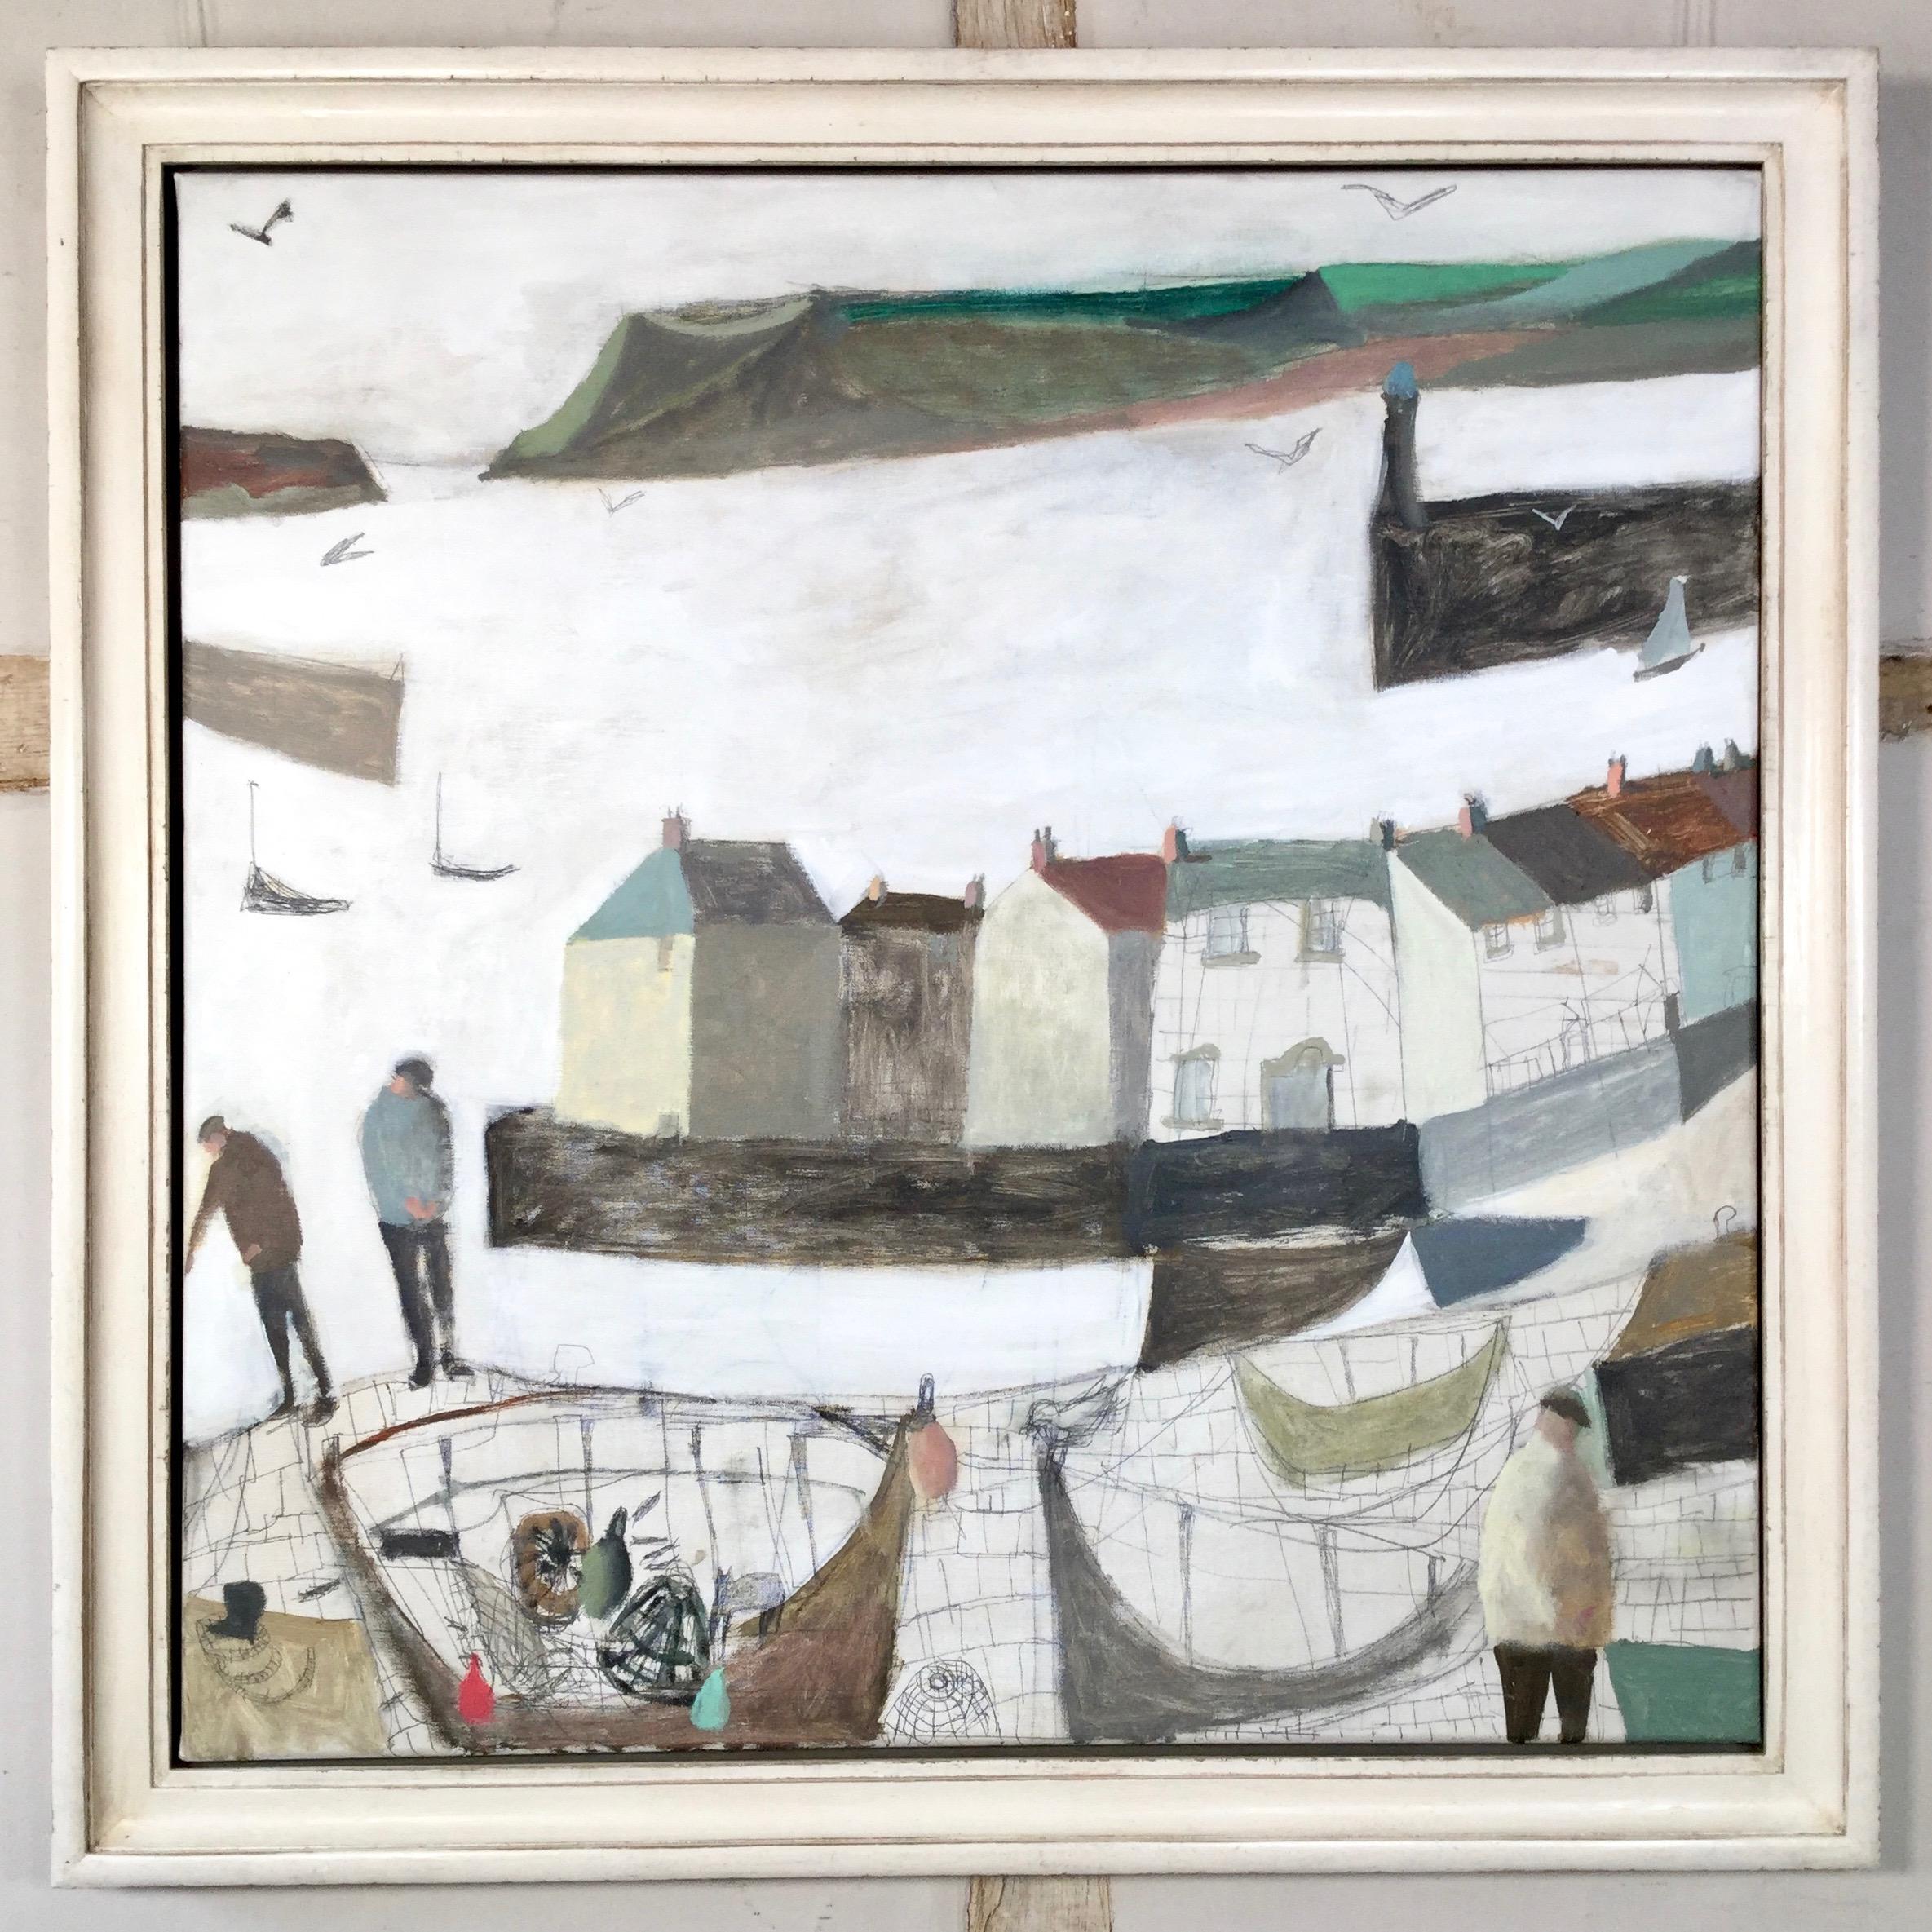 Nicholas Turner is a painter of quiet compositions, beautifully structured and well-painted. Born in London, Turner spent many years in Bristol before moving to Abergavenny, Wales. In 1997 he received his BA (Hons) in Fine Art from UWE Bristol and